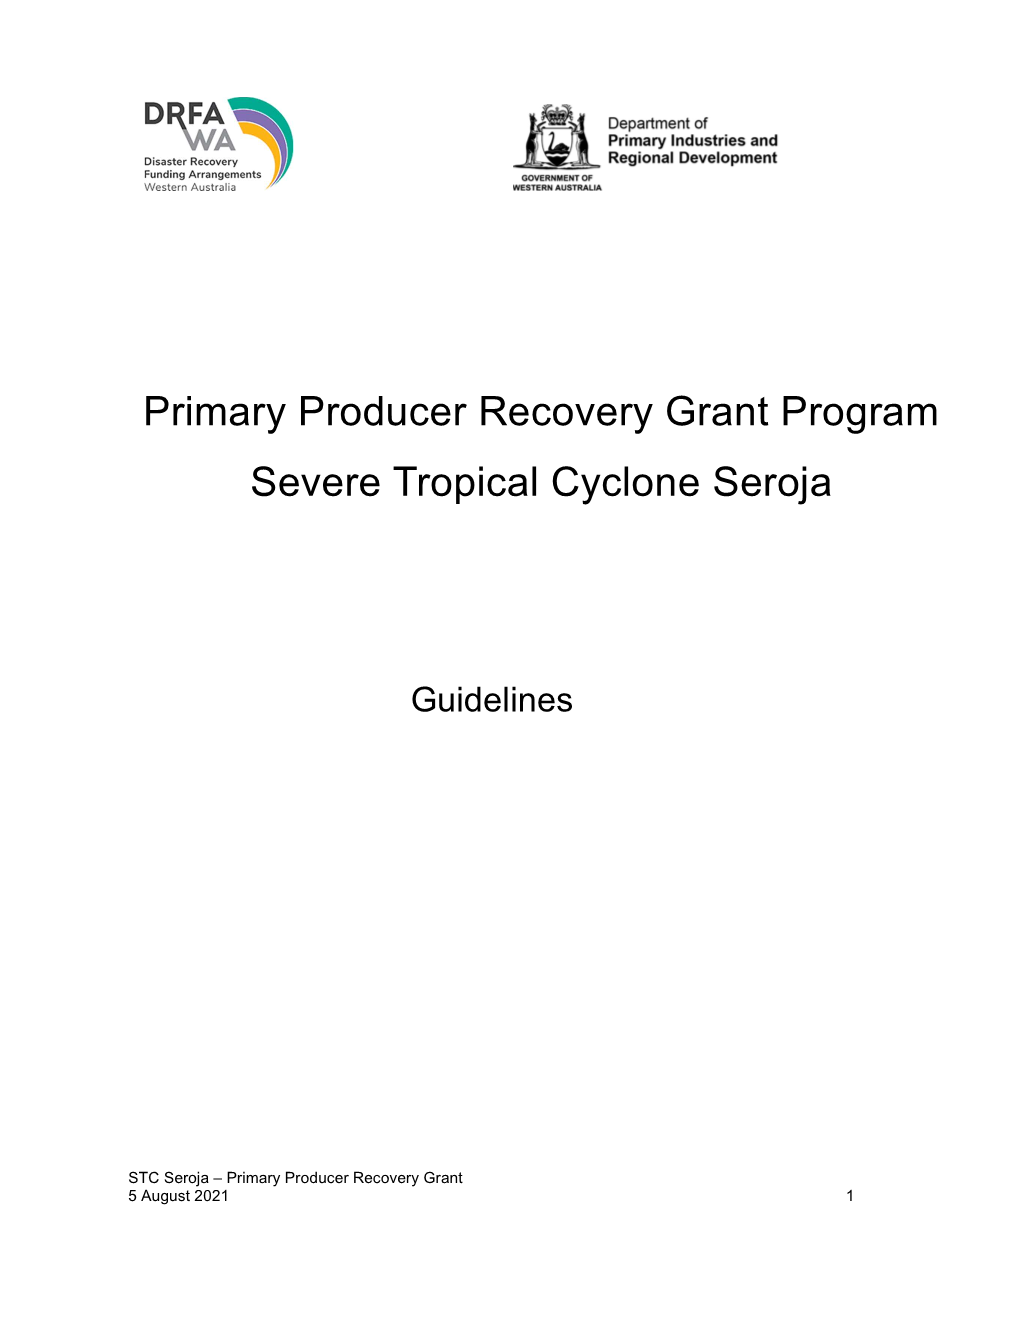 STC Seroja Primary Producer Recovery Grant Guidelines 5